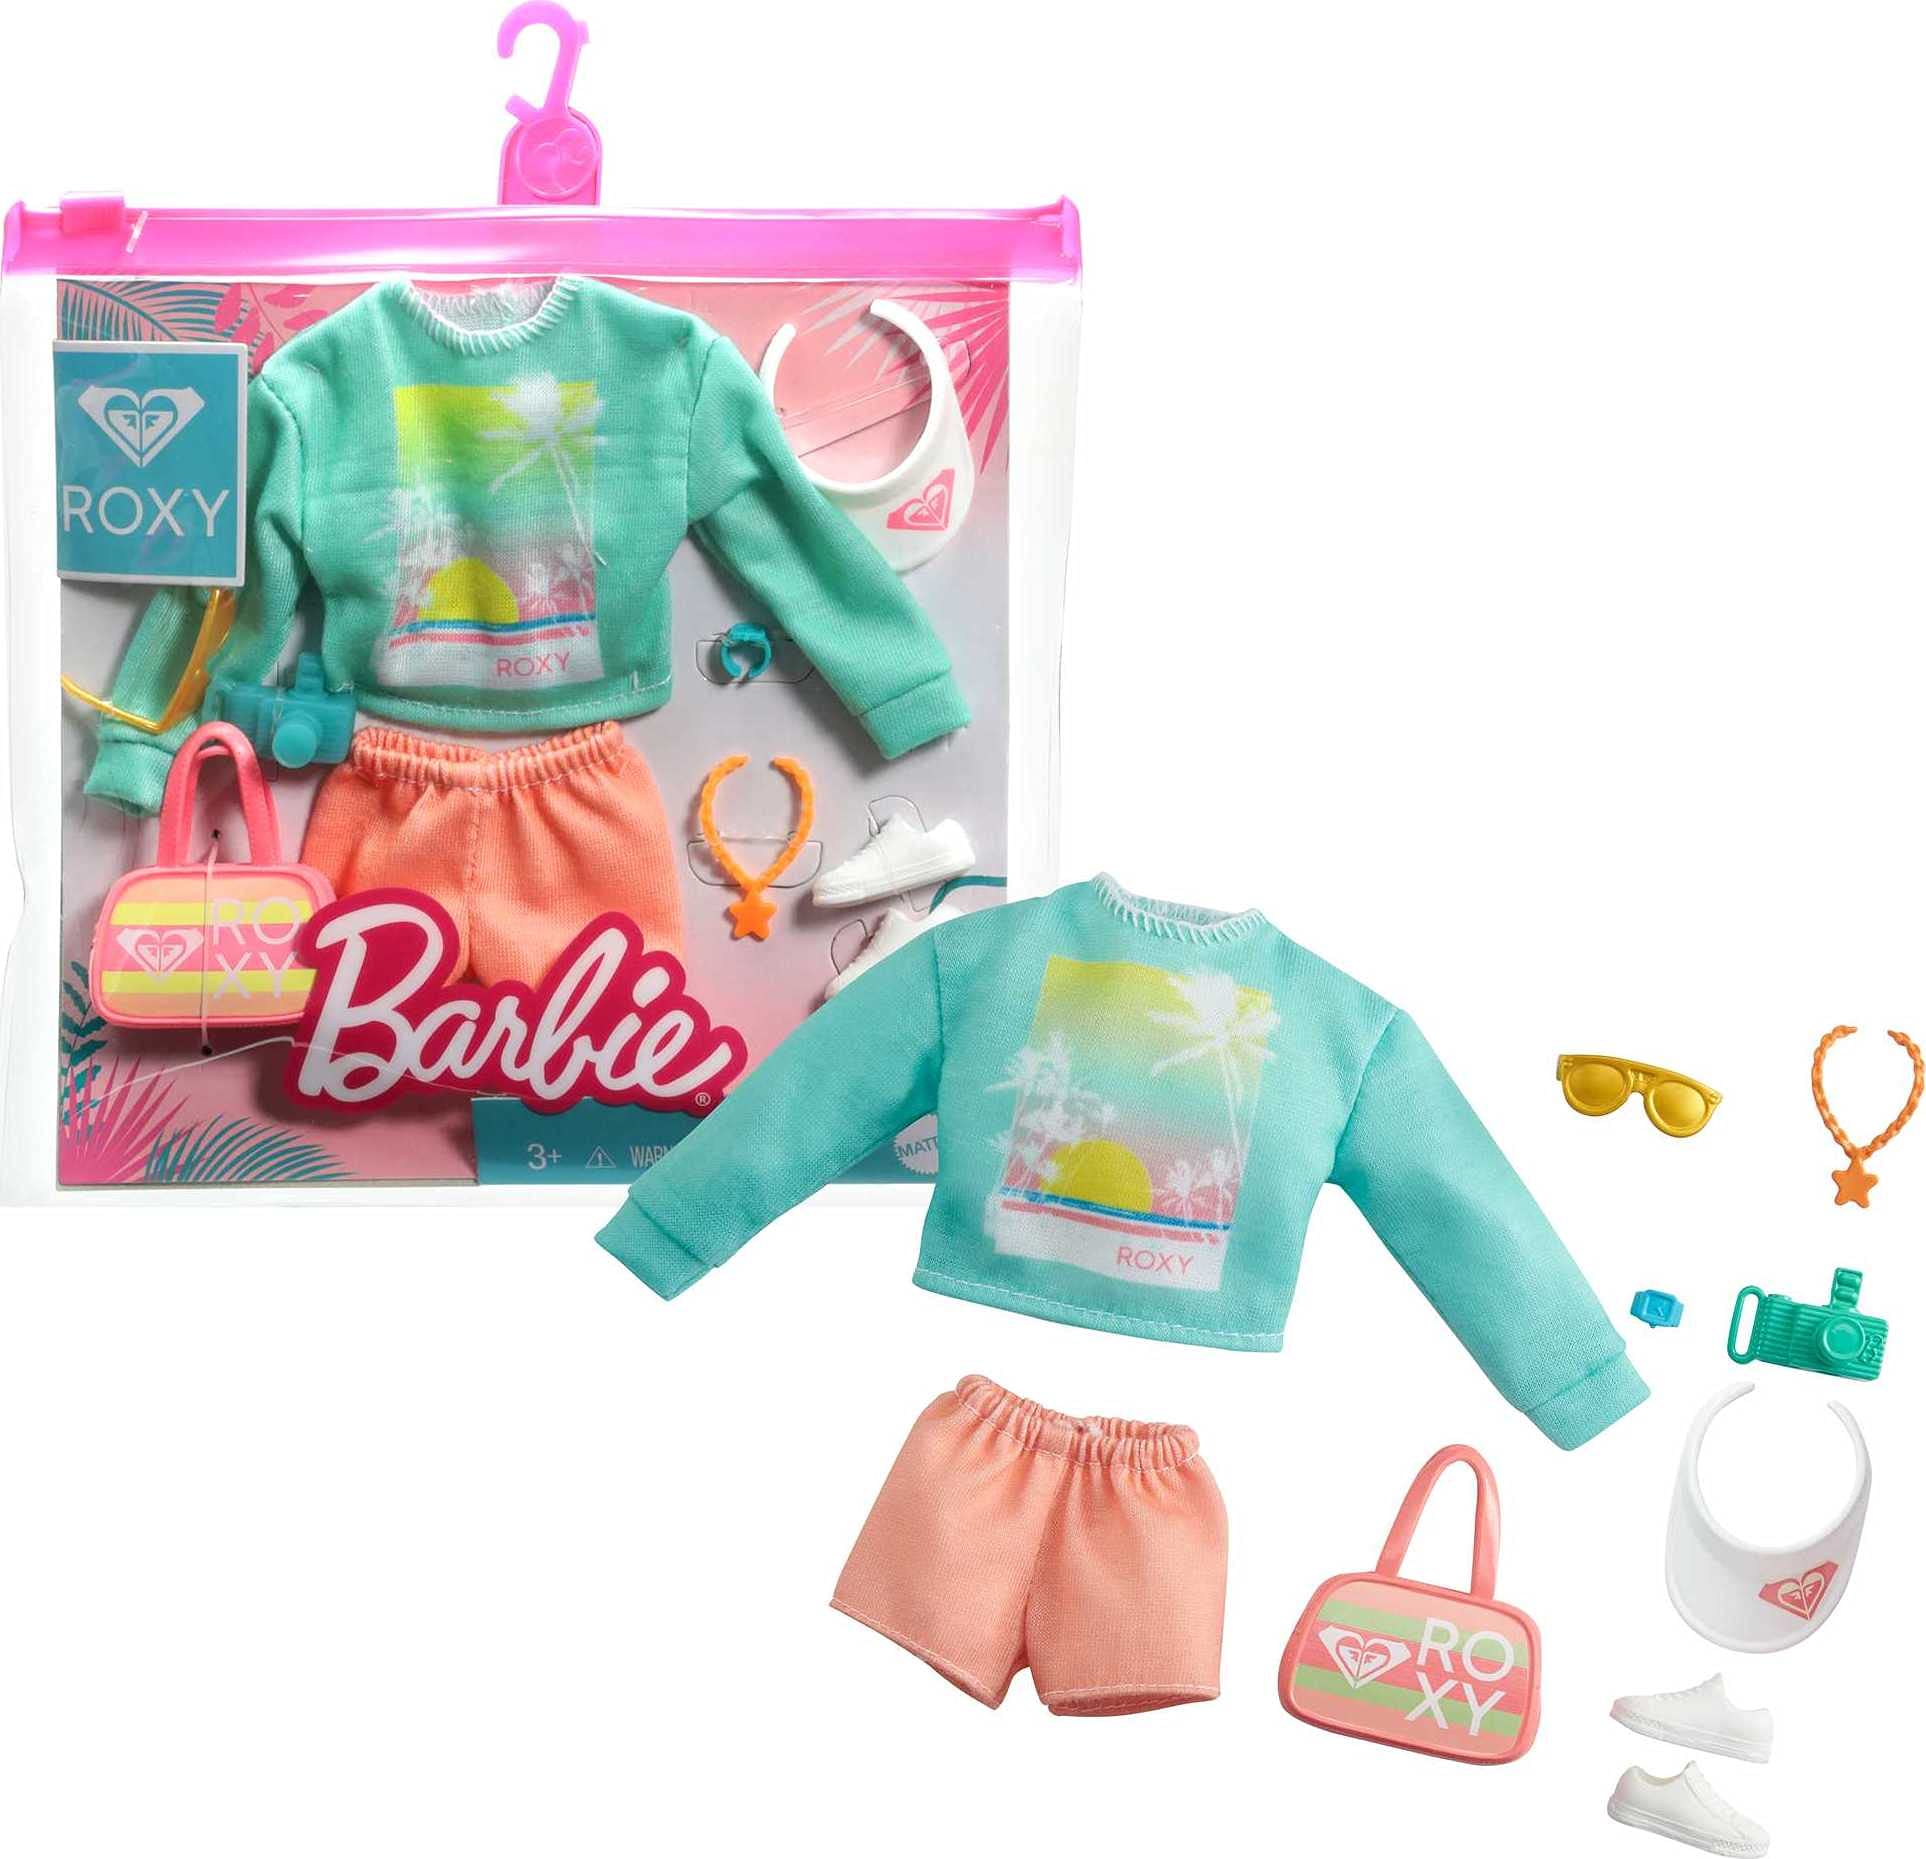 Mua Barbie Storytelling Fashion Pack of Doll Clothes Inspired by Roxy:  Sweatshirt with Roxy Graphic, Orange Shorts & 7 Beach-Themed Accessories  Dolls Including Camera trên Amazon Mỹ chính hãng 2023 | Giaonhan247